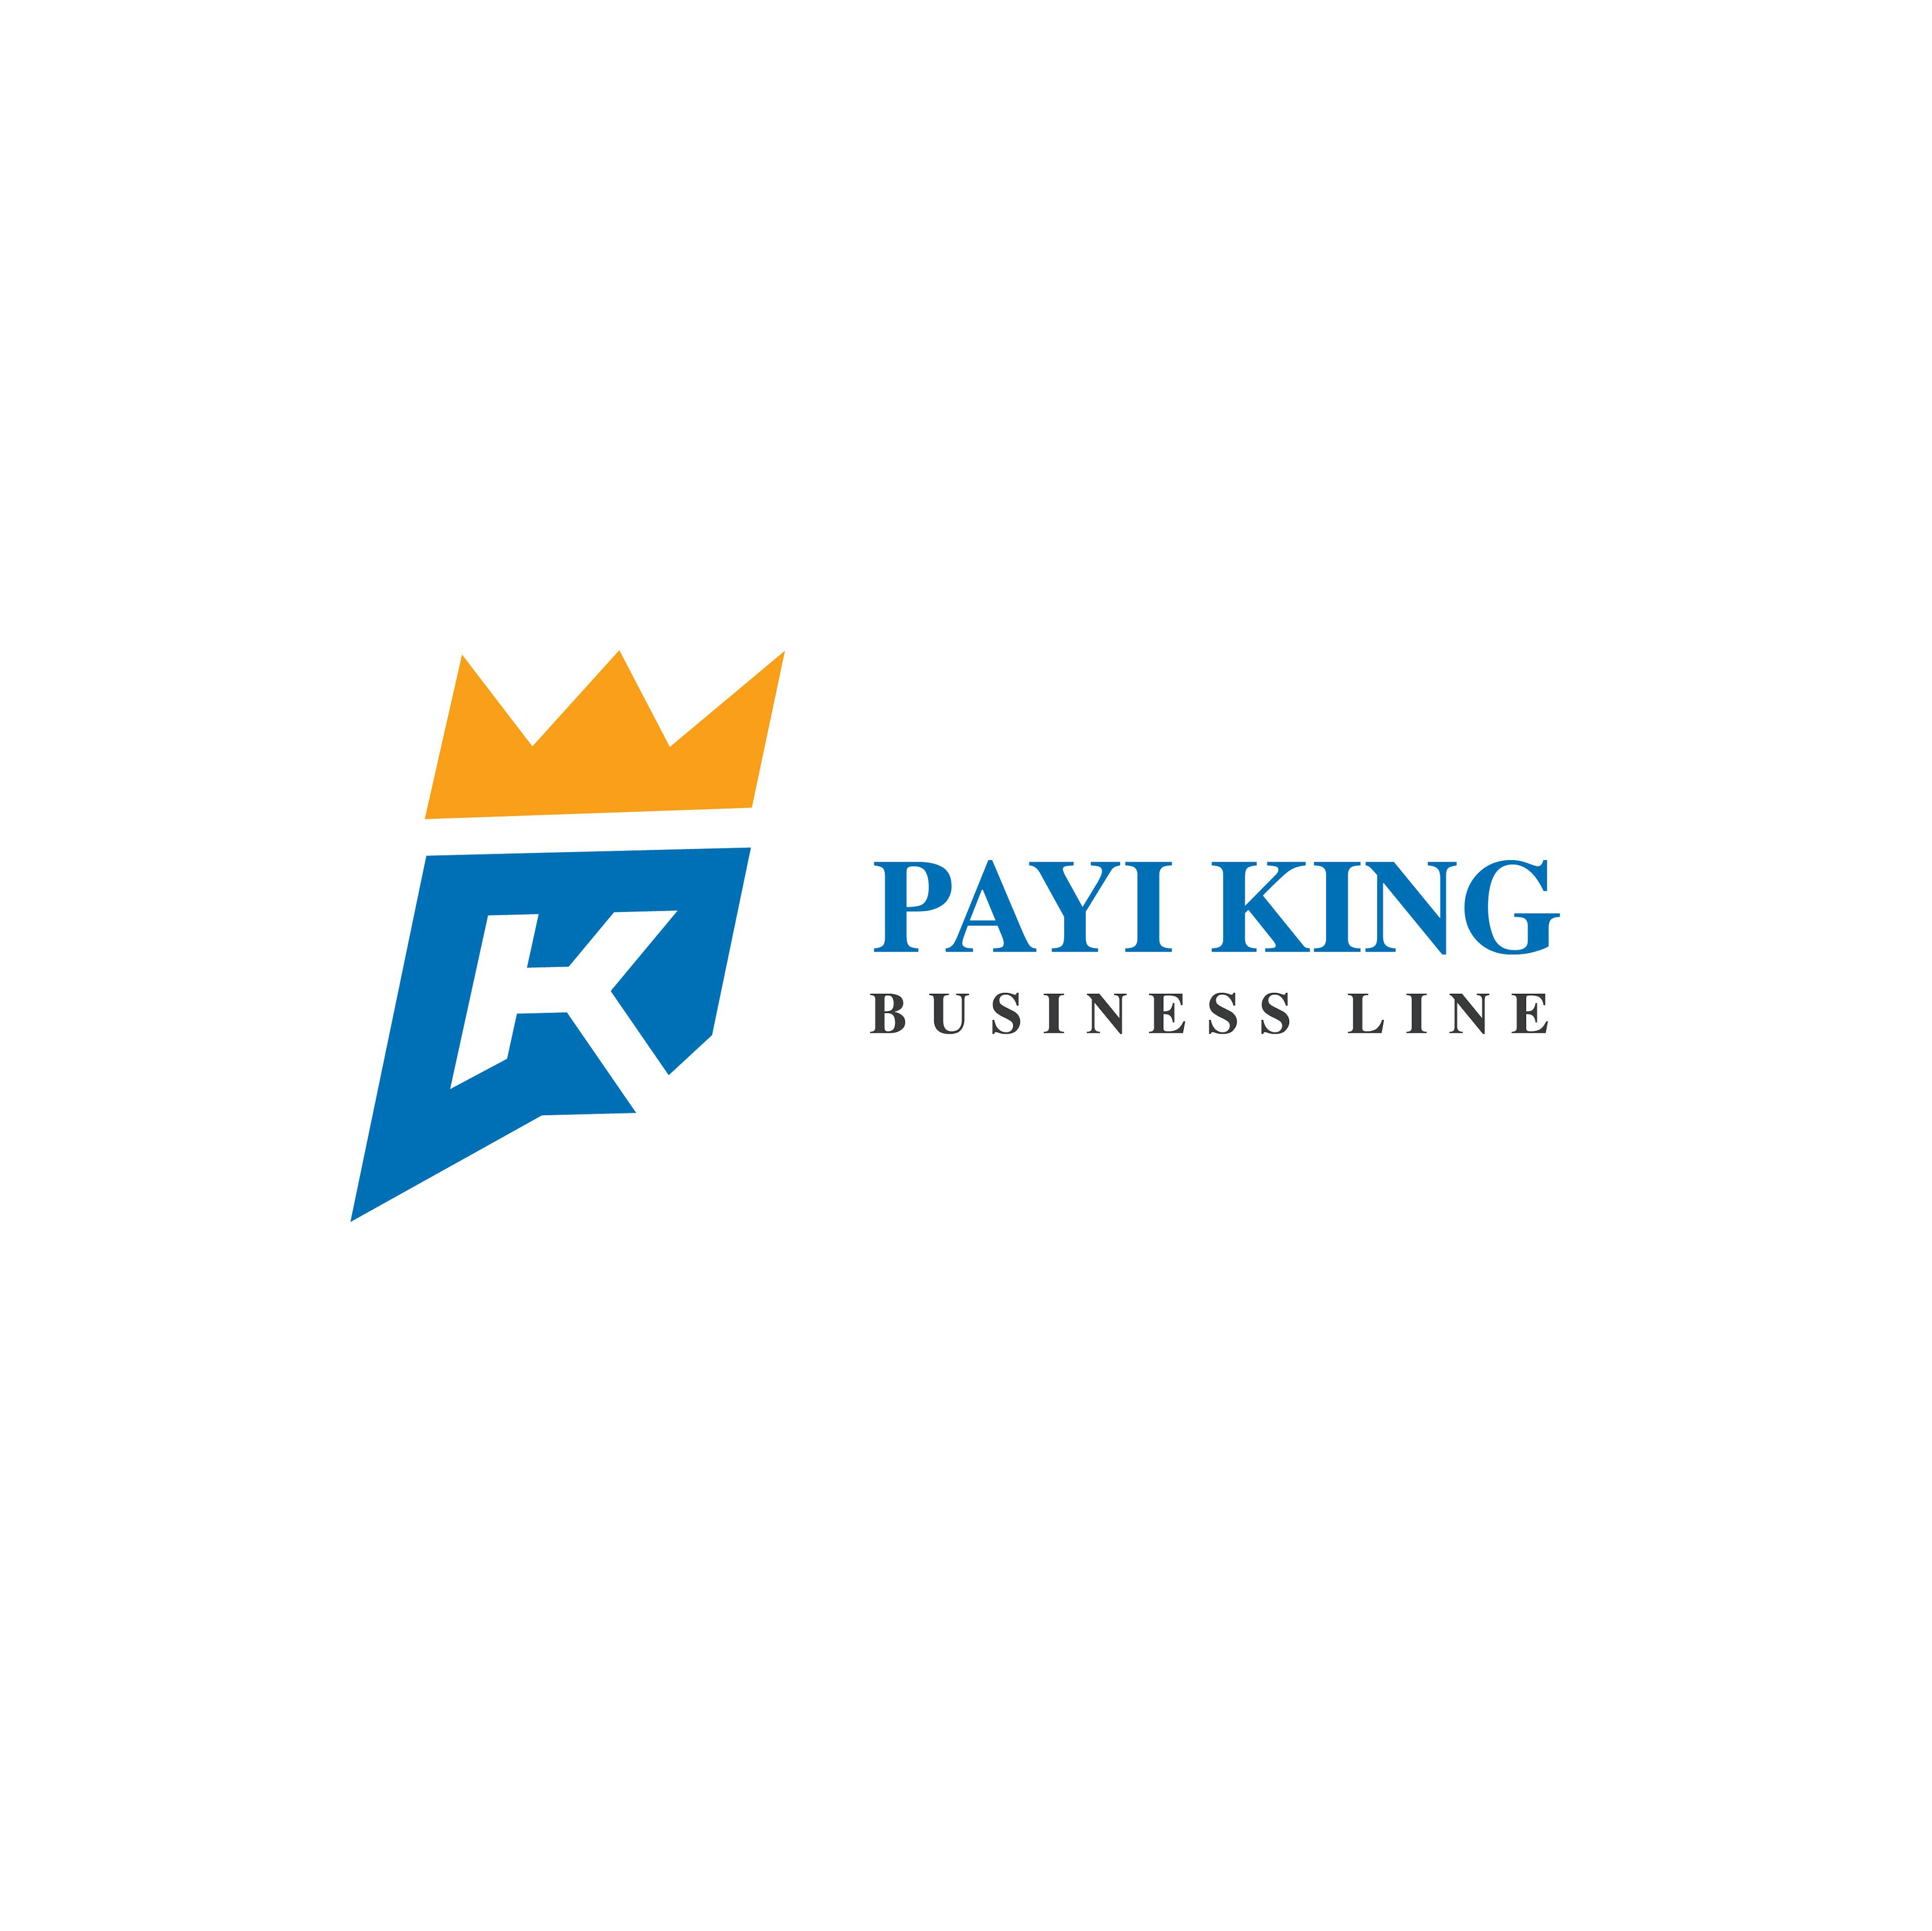 Pay King Business Line